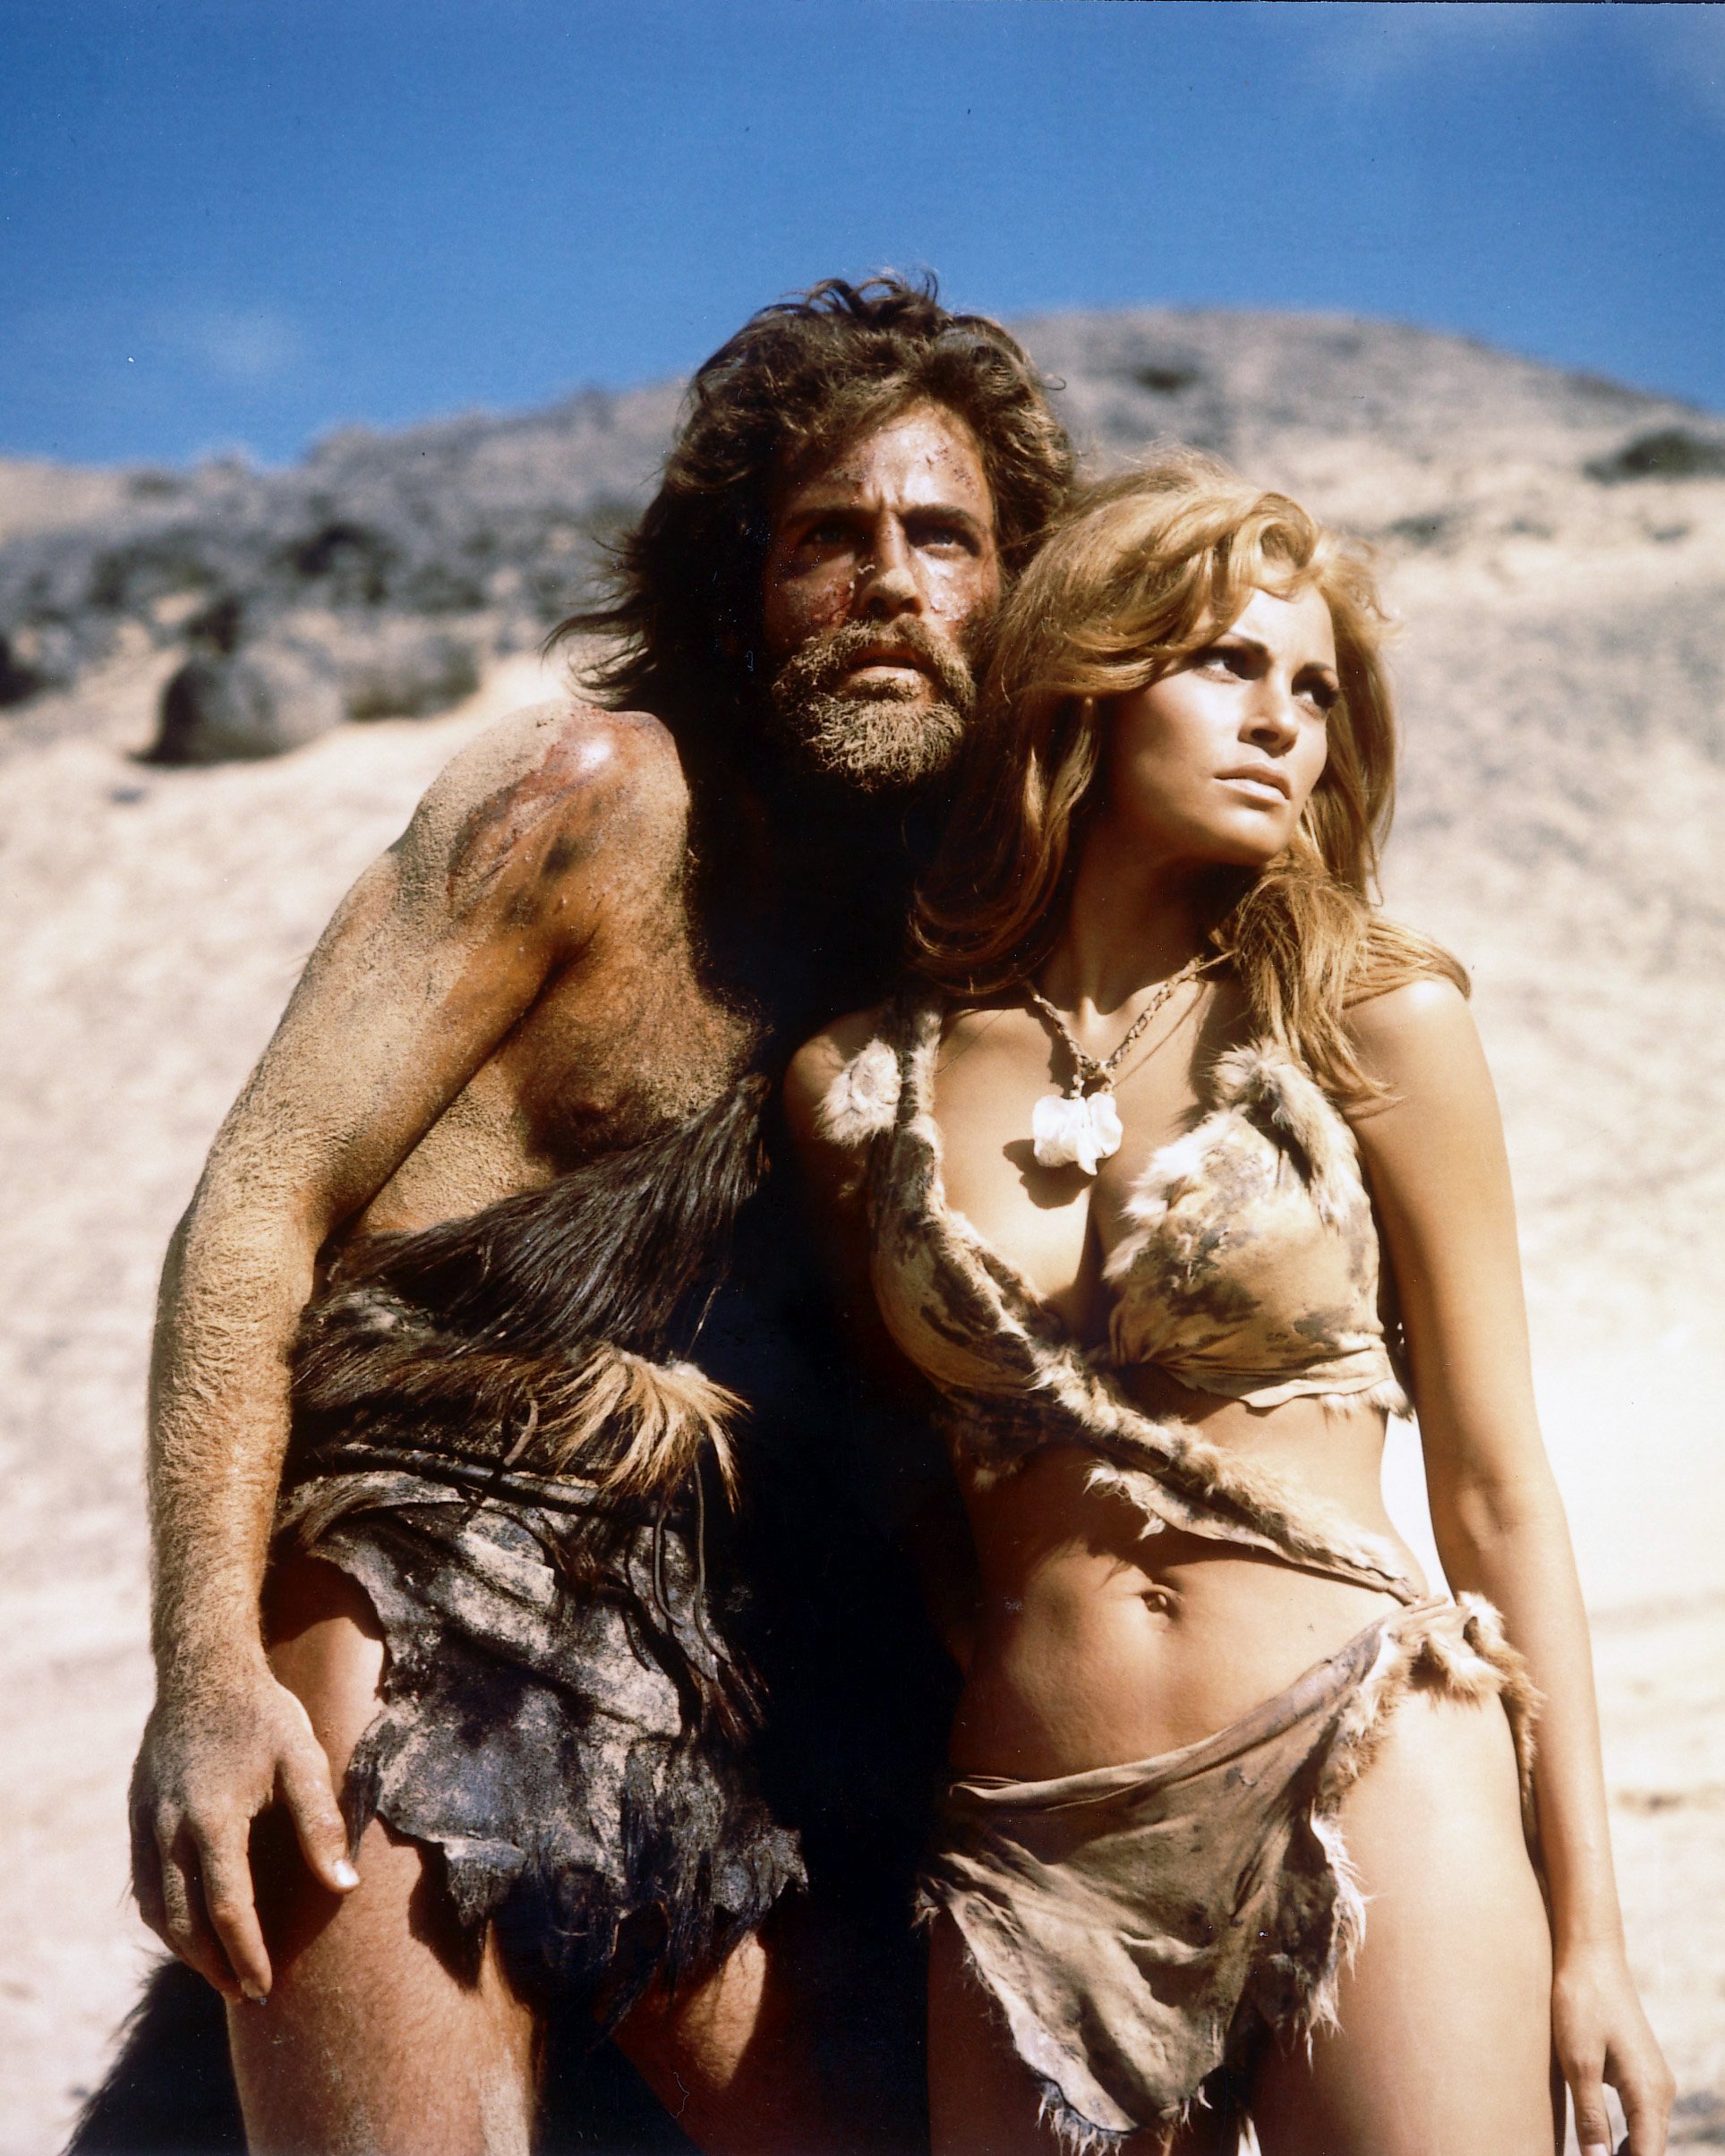 John Richardson, British actor, Raquel Welch, US actress, both wearing animal hides in a publicity portrait issued for the film, 'One Million Years BC', 1966 | Source: Getty Images 